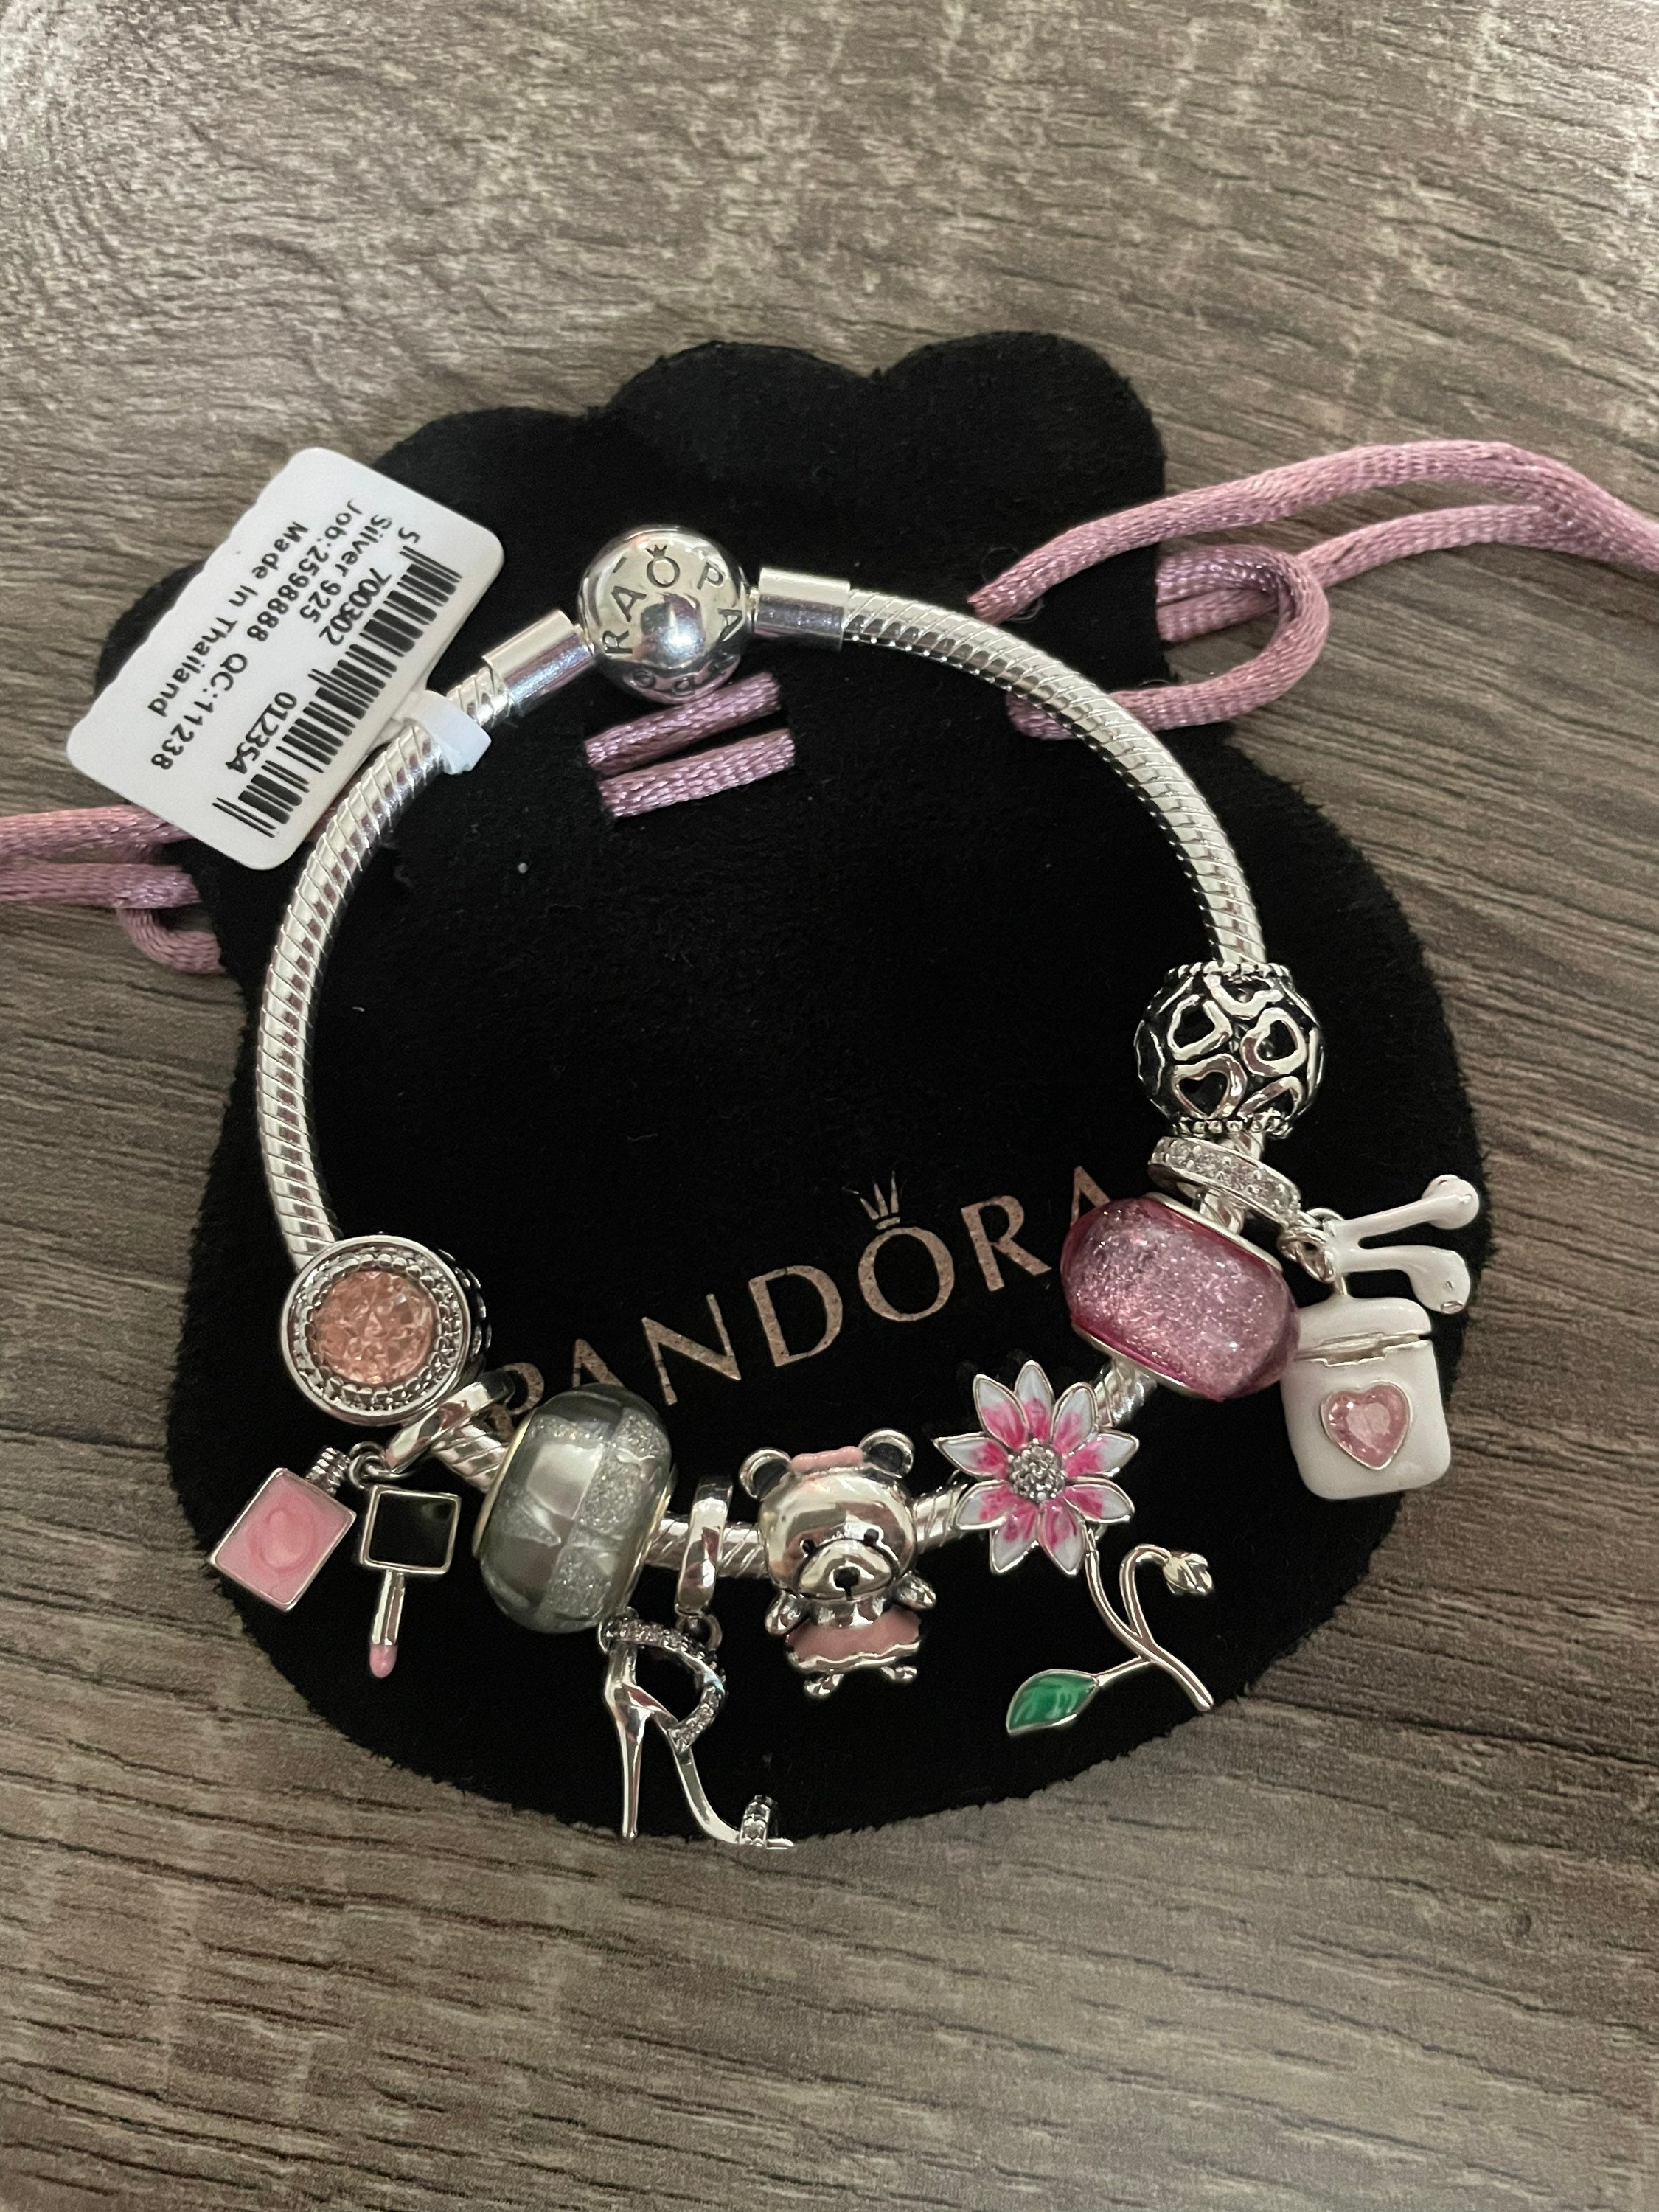 PANDORA BRACELET WITH PINK DOG MOM LOVE HEART THEMED CHARMS & GIFT POUCH!